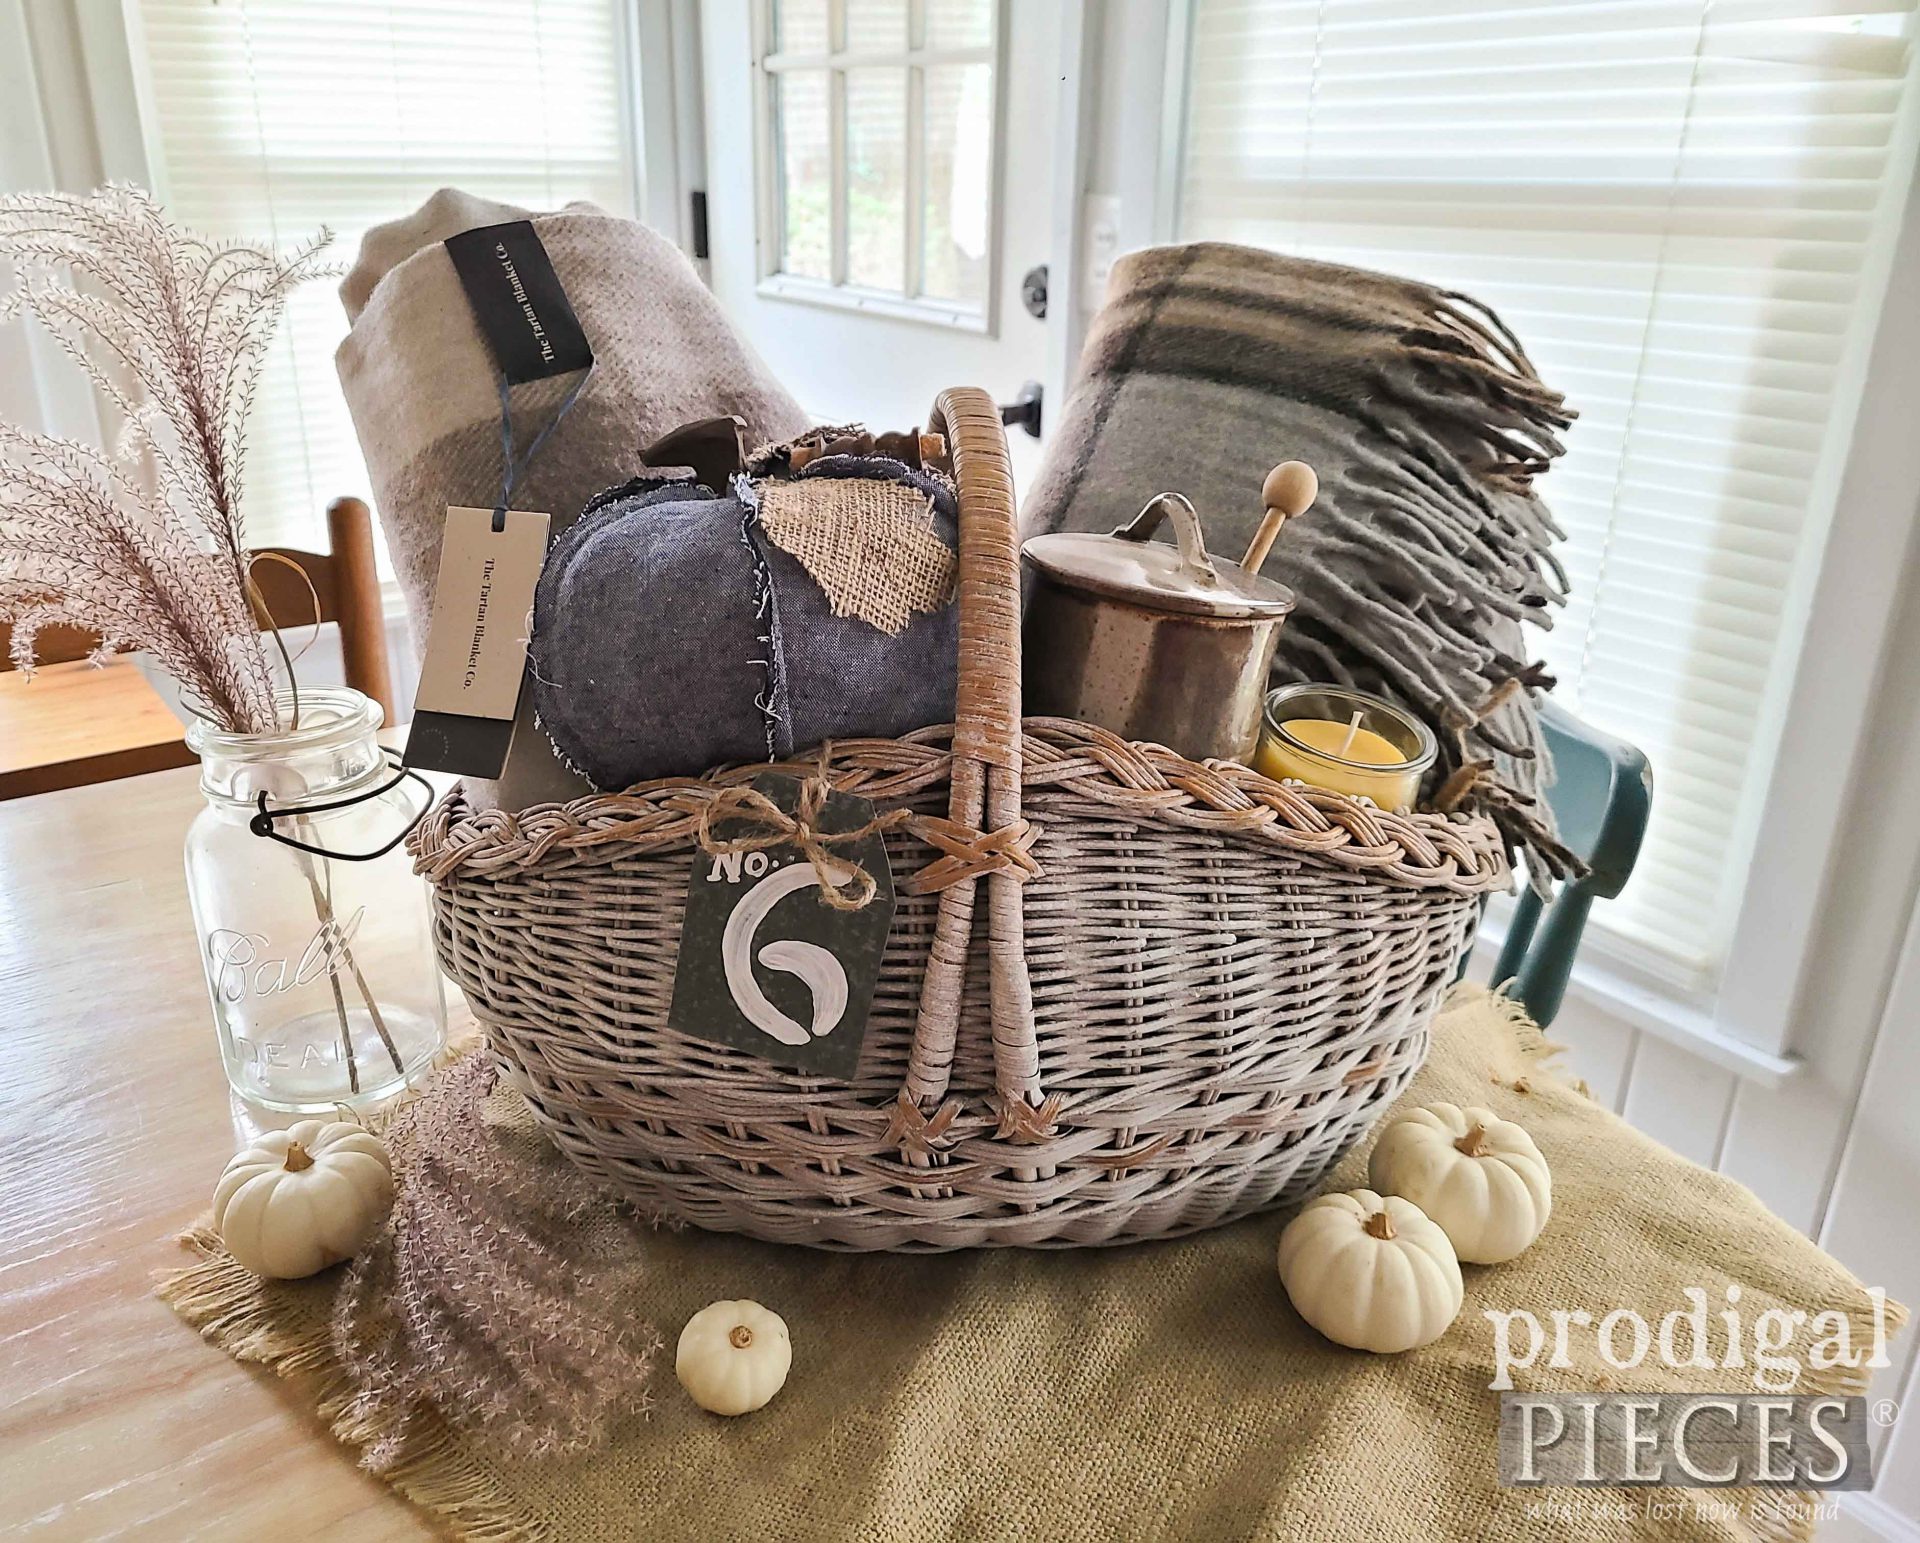 Beautiful Farmhouse Harvest Gift Basket Filled with Fall Goodies by Larissa of Prodigal Pieces | prodigalpieces.com #prodigalpieces #farmhouse #diy #giftidea